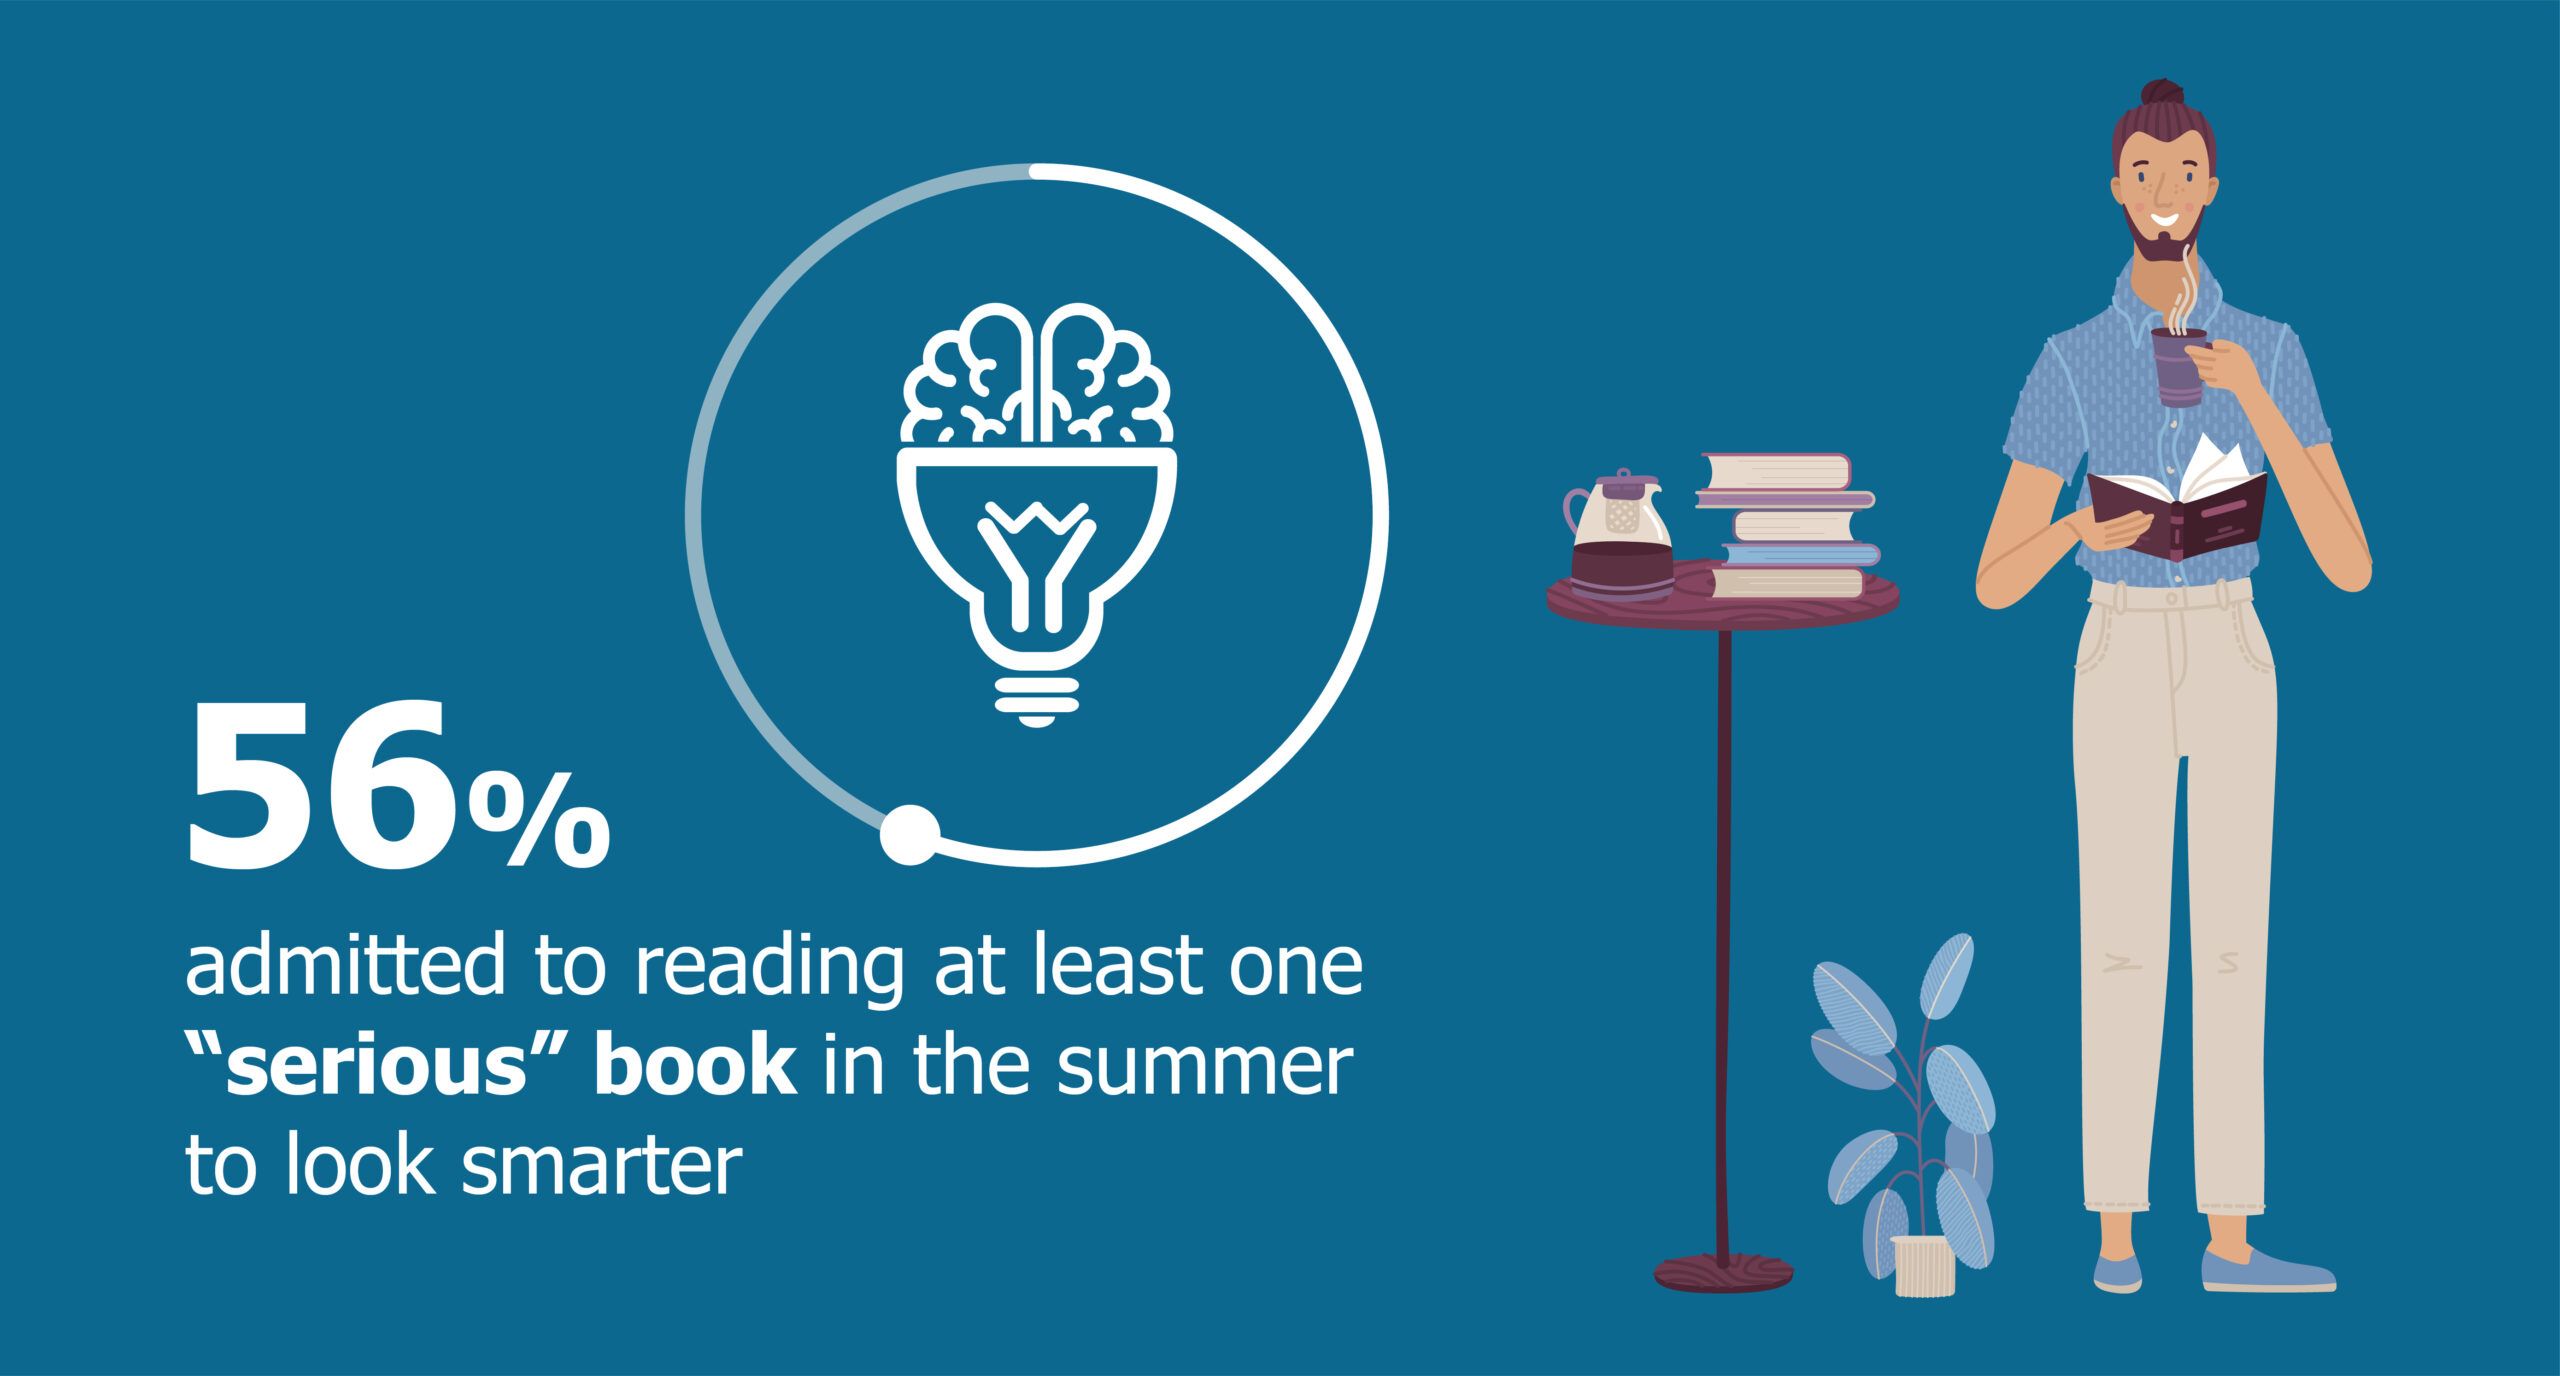 Graphic with person drinking coffee and reading books with text saying 56% of Americans admit to reading a serious book in the summer to seem smarter